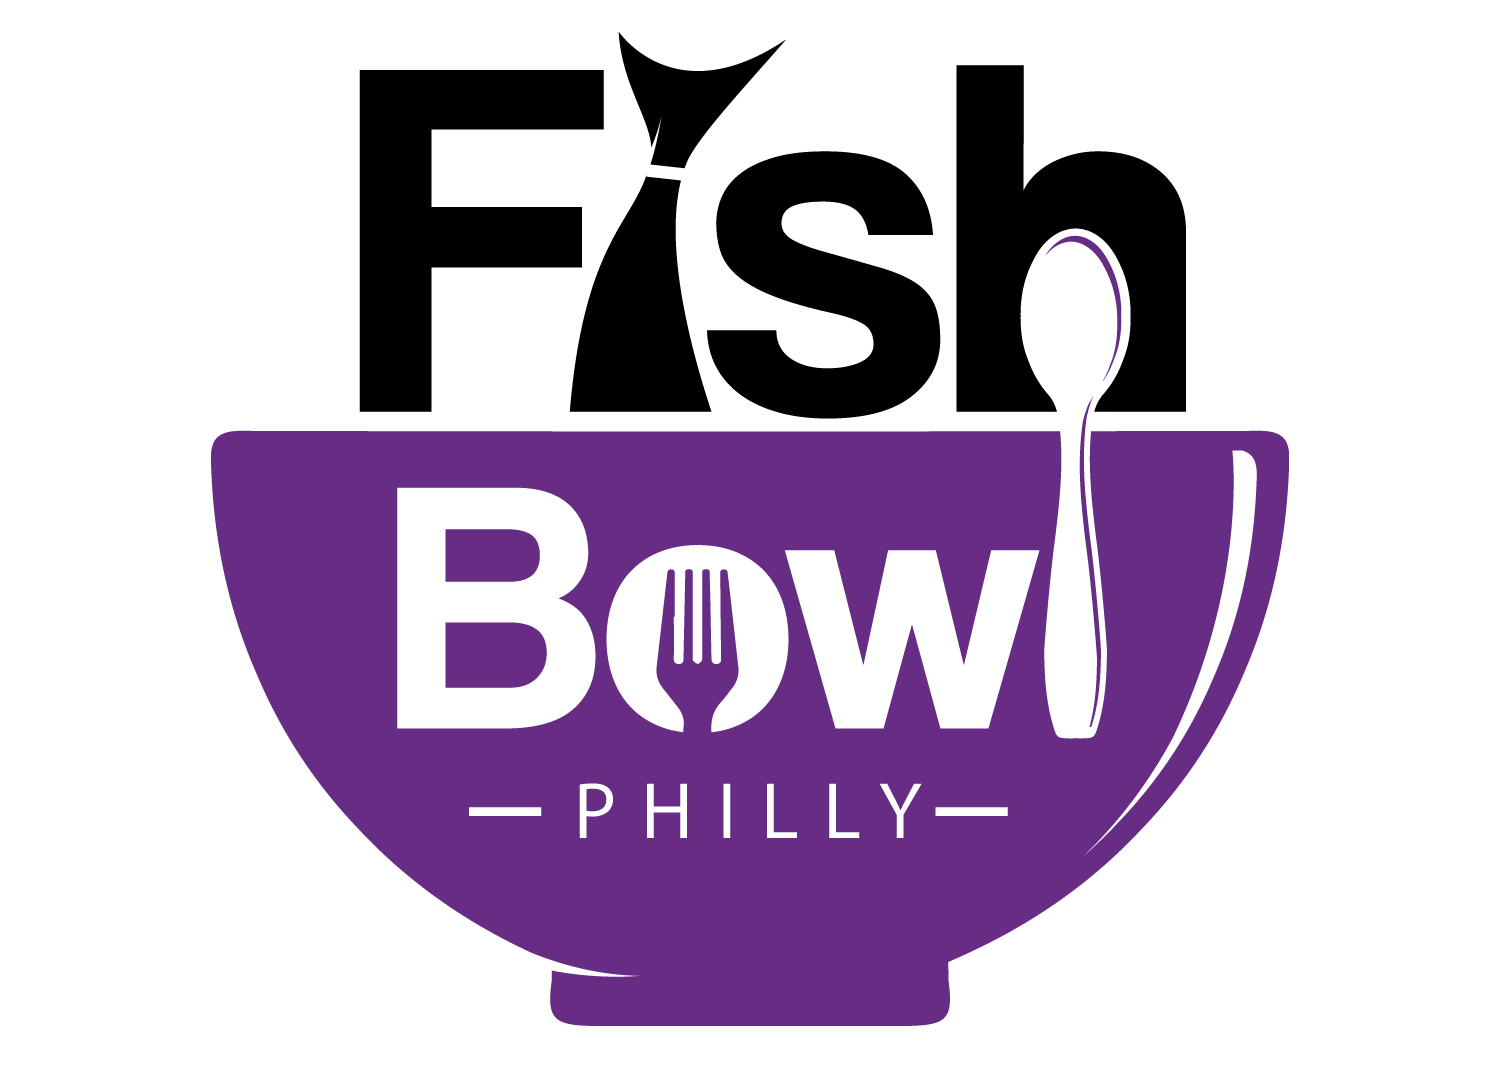 Fishbowl Philly